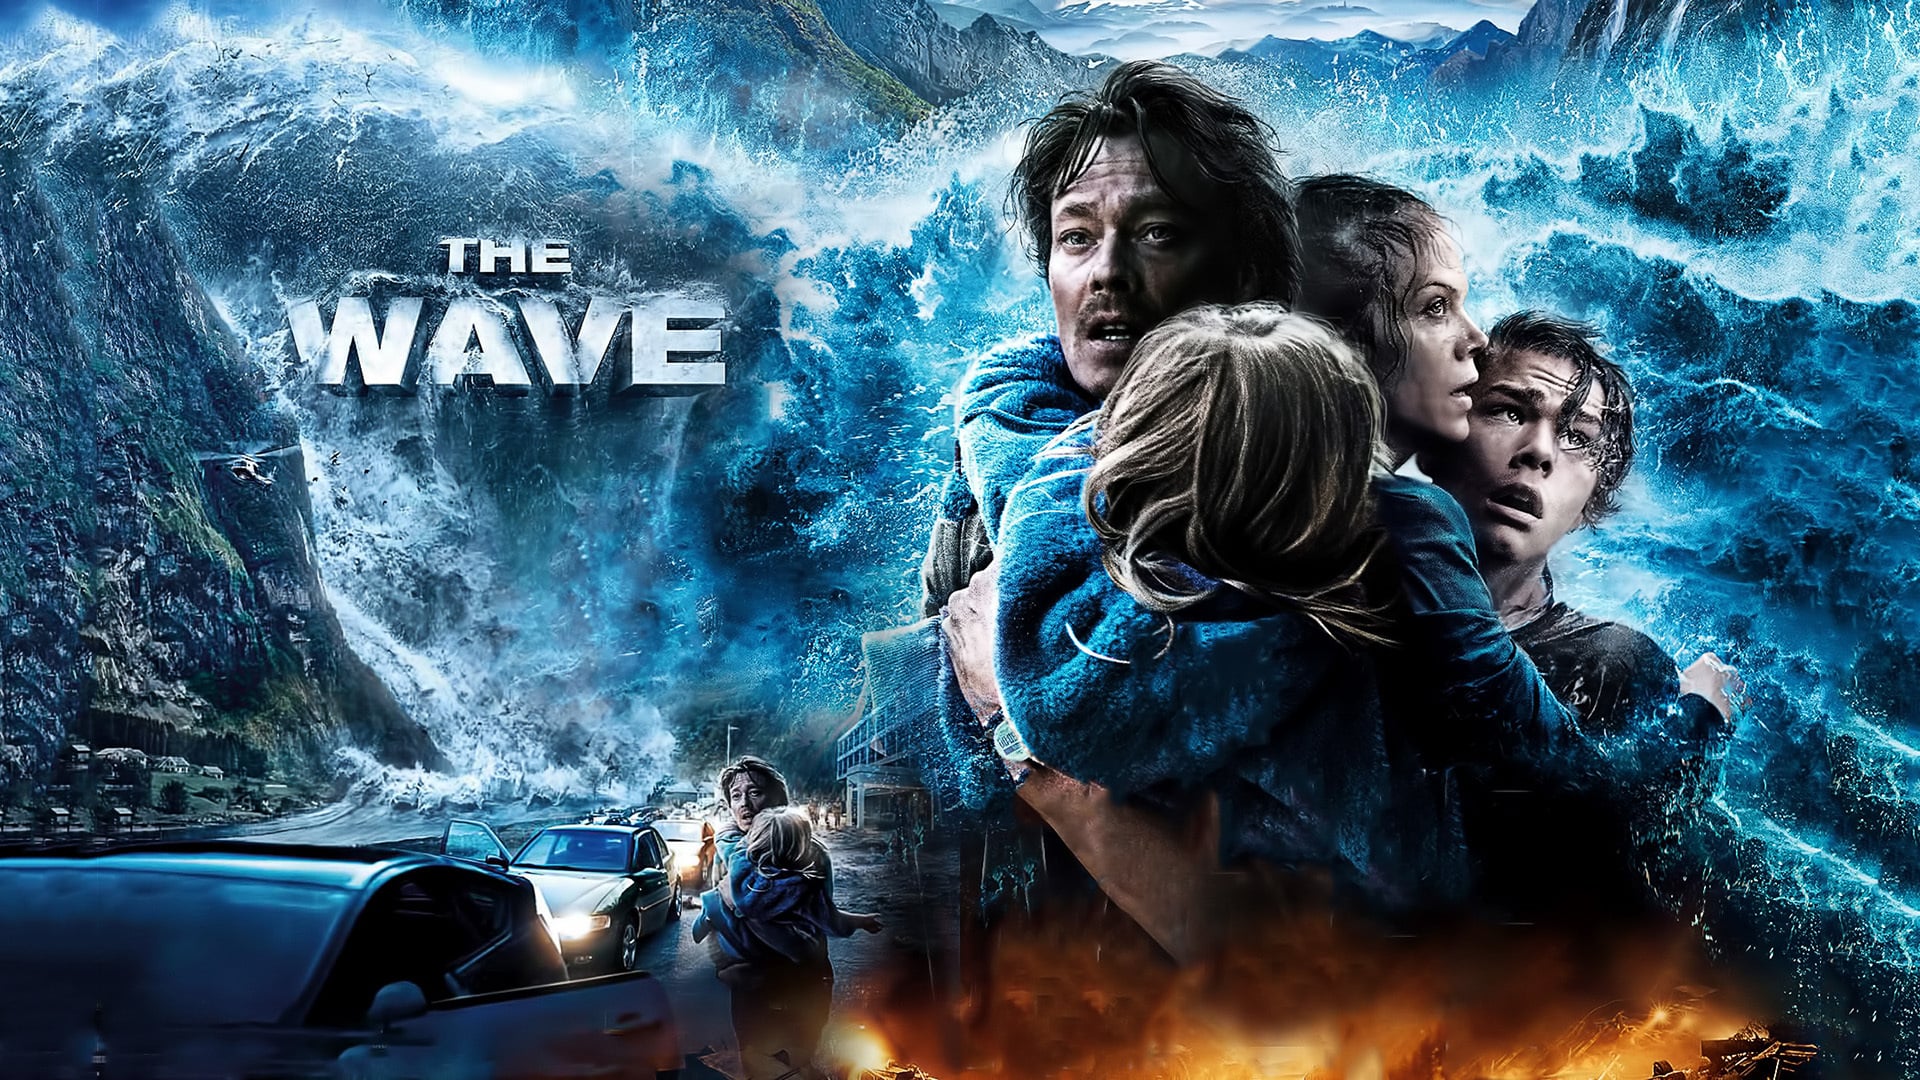 Watch The Wave(2015) Online Free, The Wave Full Movie - Indexflicks